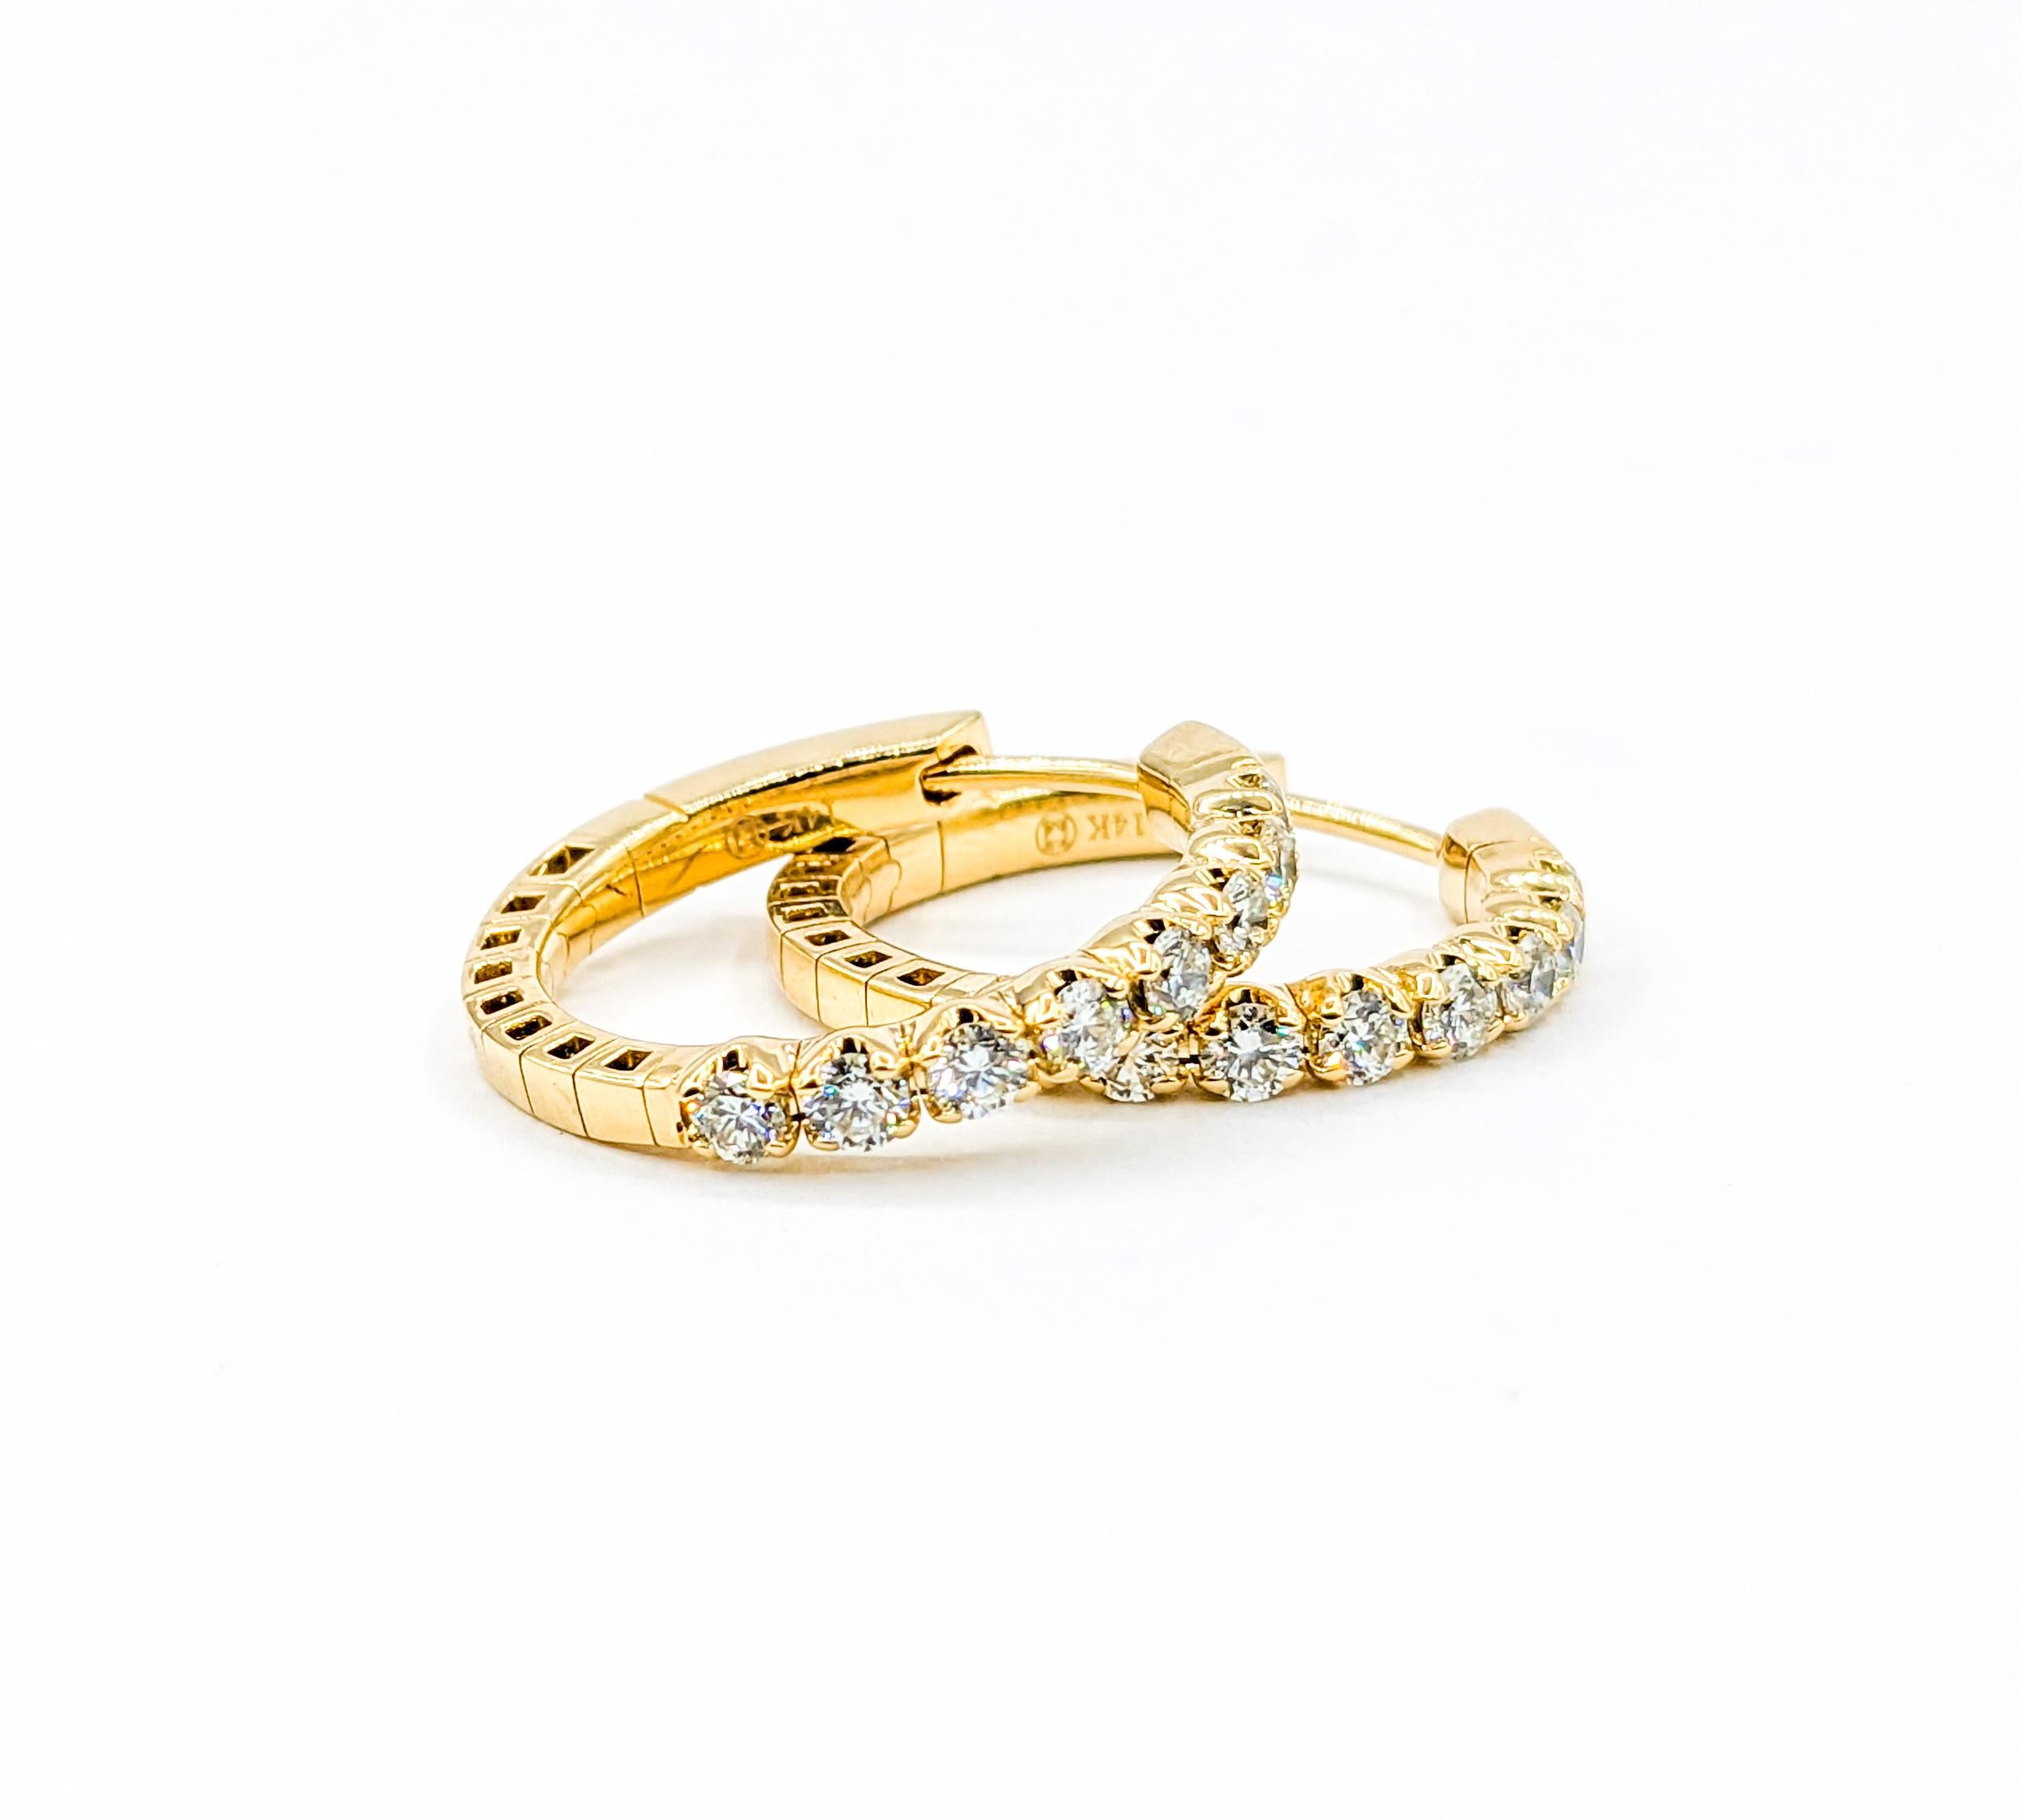 .95ctw Diamond Hoop Earrings

These gorgeous earrings, crafted meticulously in 14k yellow gold, showcase dazzling hoop designs, adorned with an impressive .95ctw diamonds. The sparkling diamonds boast a clarity of SI1 and a radiant H color,